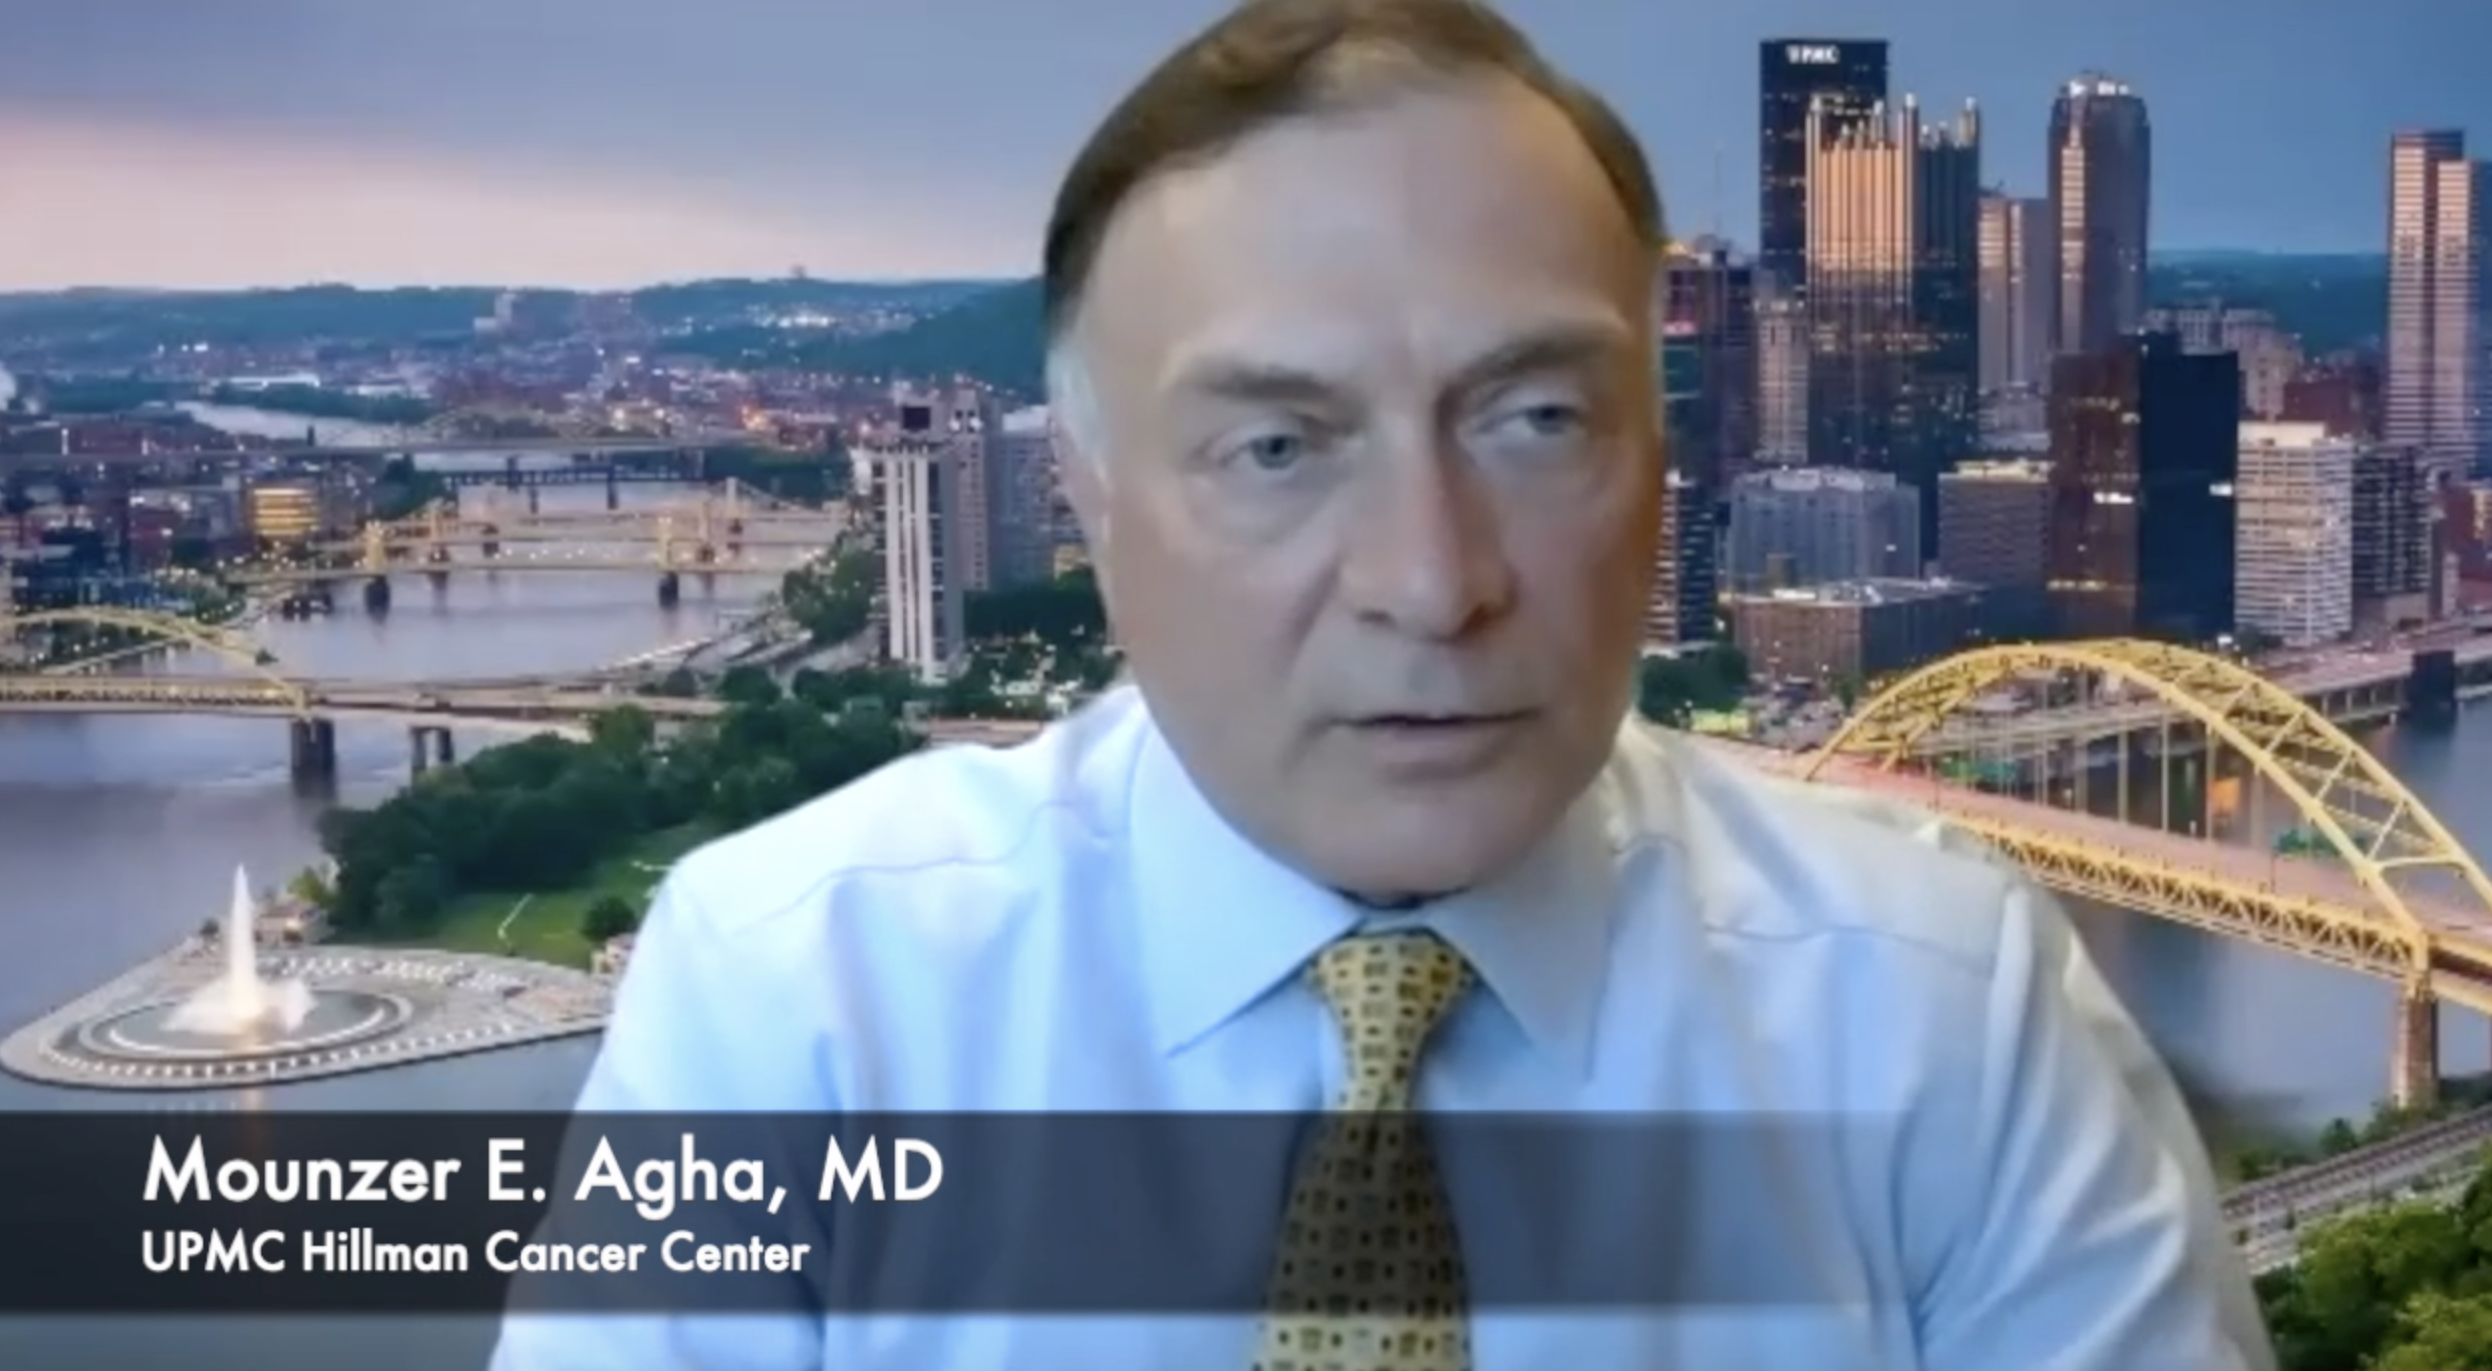 Mounzer E. Agha, MD, Discussed the Value of ASCO Annual Meeting for Multiple Myeloma